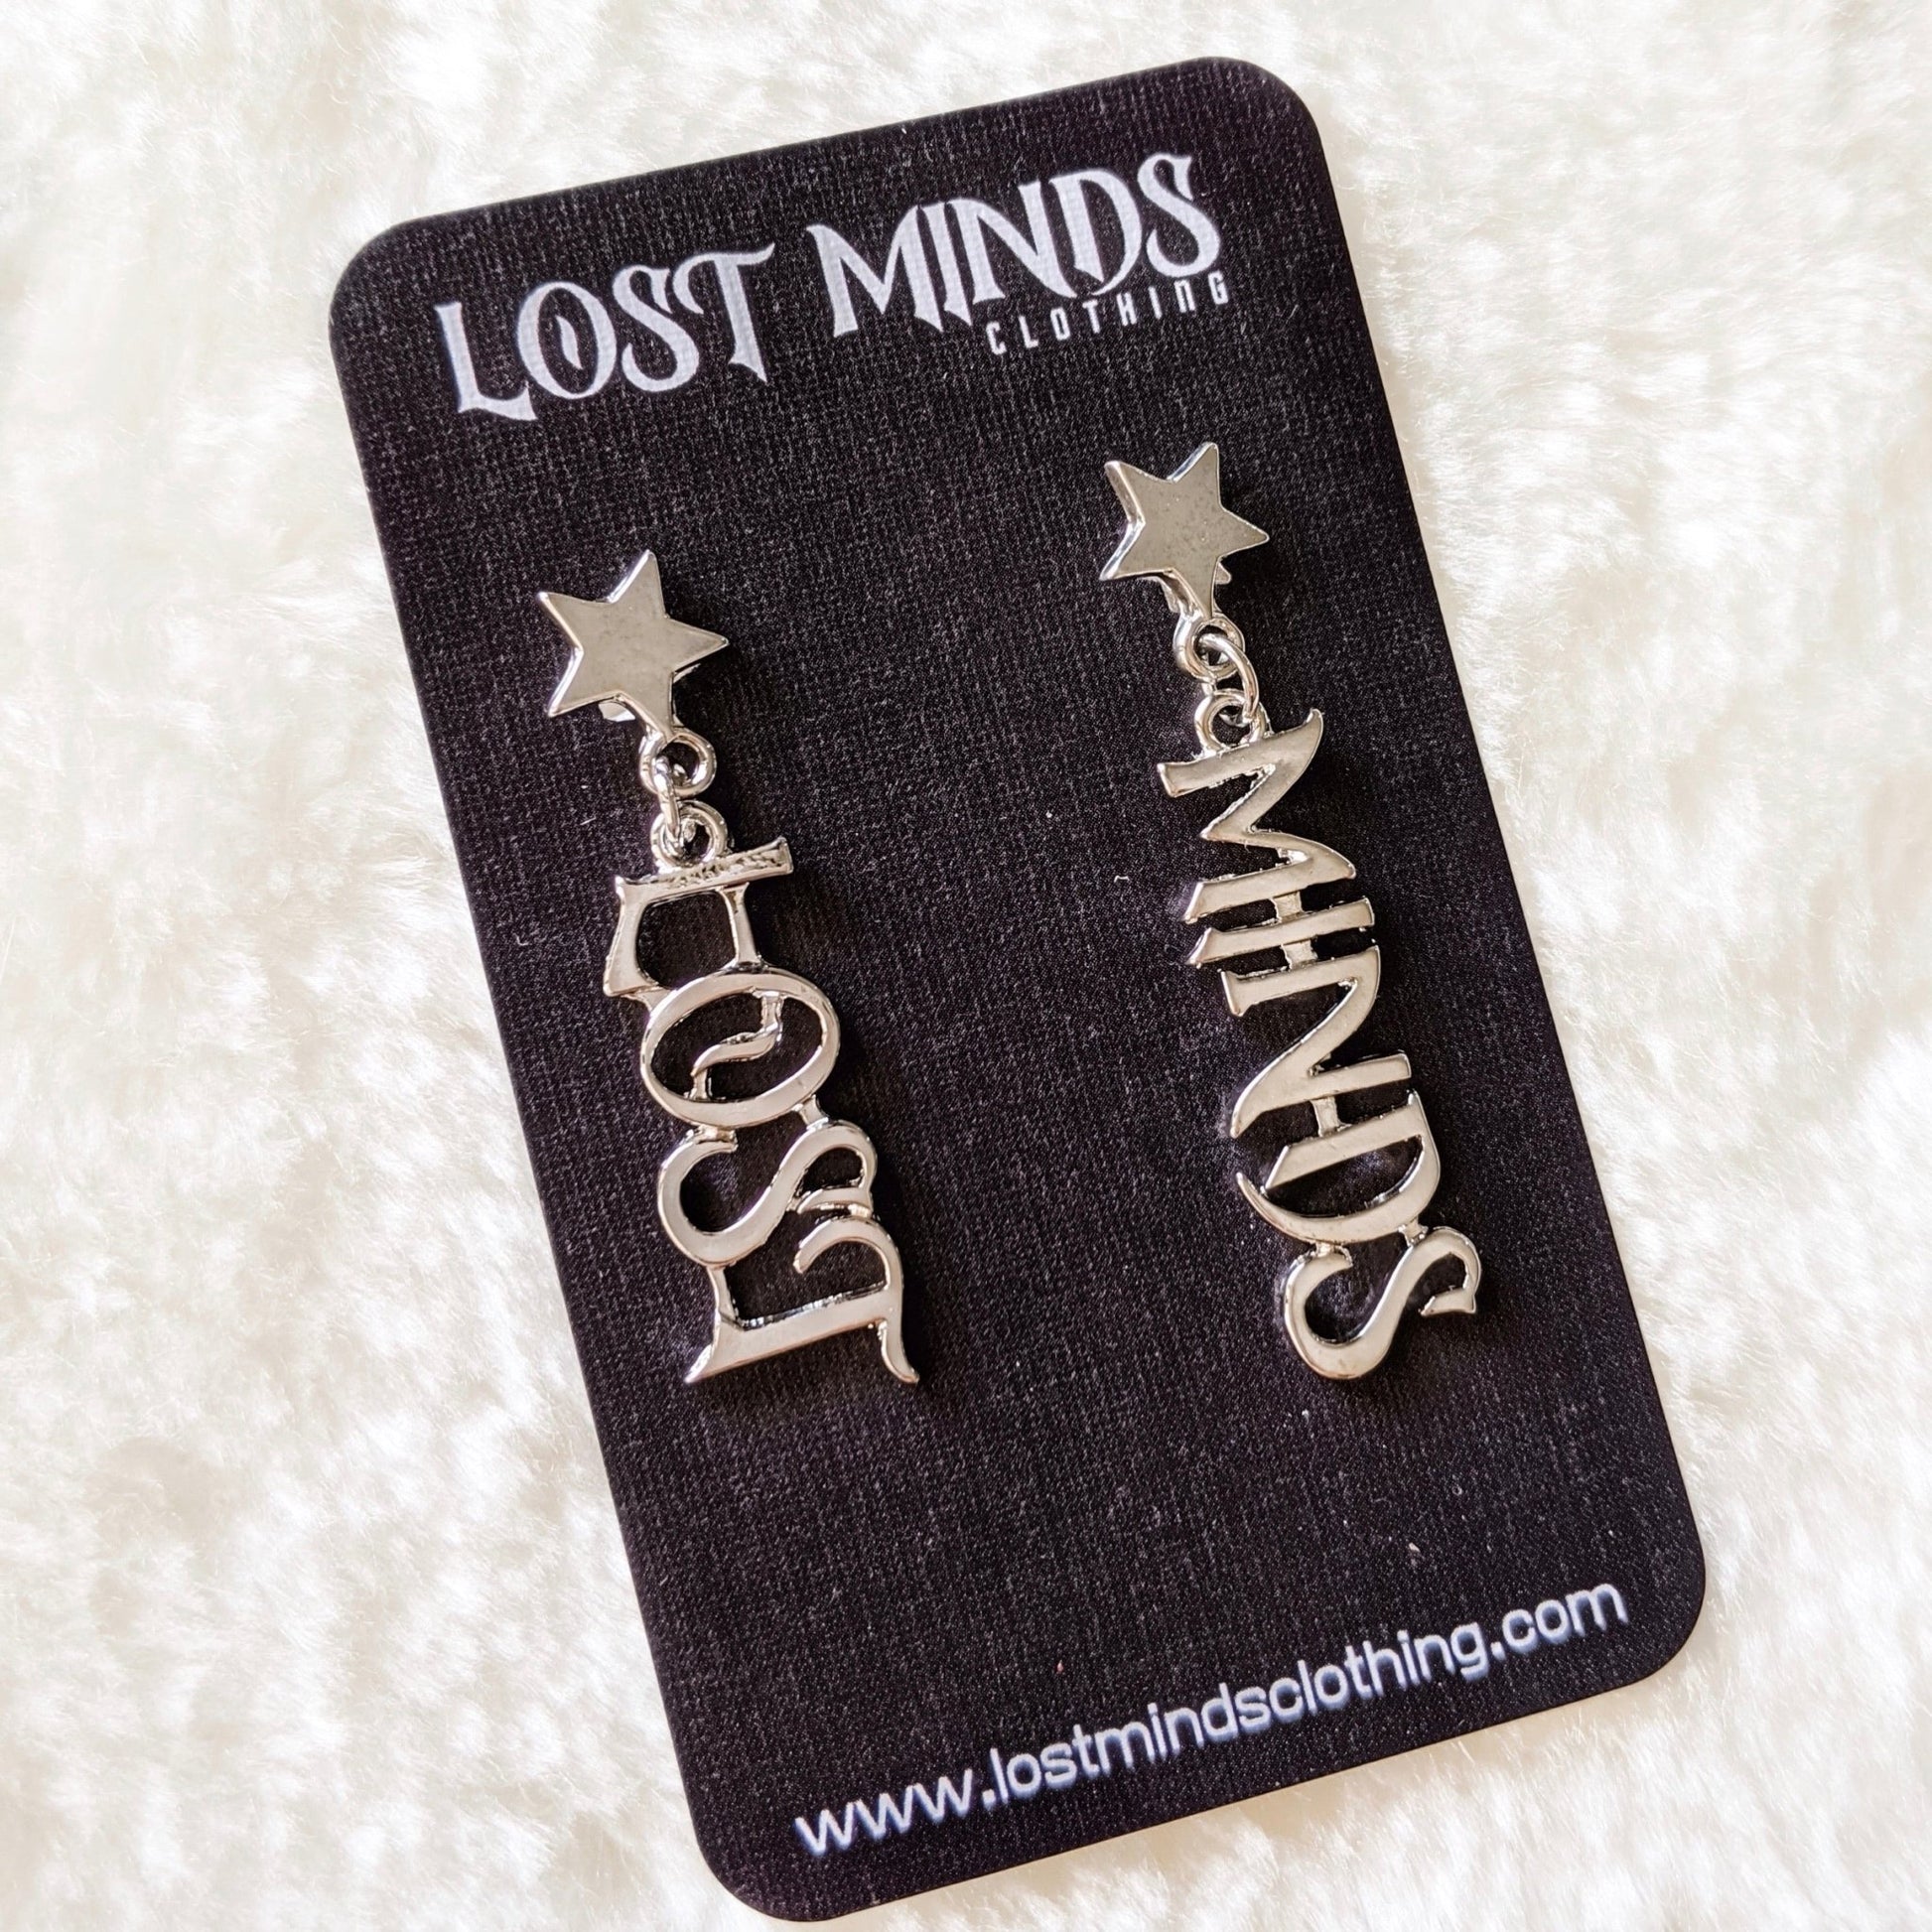 Lost Minds Signature Earrings - Silver - Lost Minds Clothing